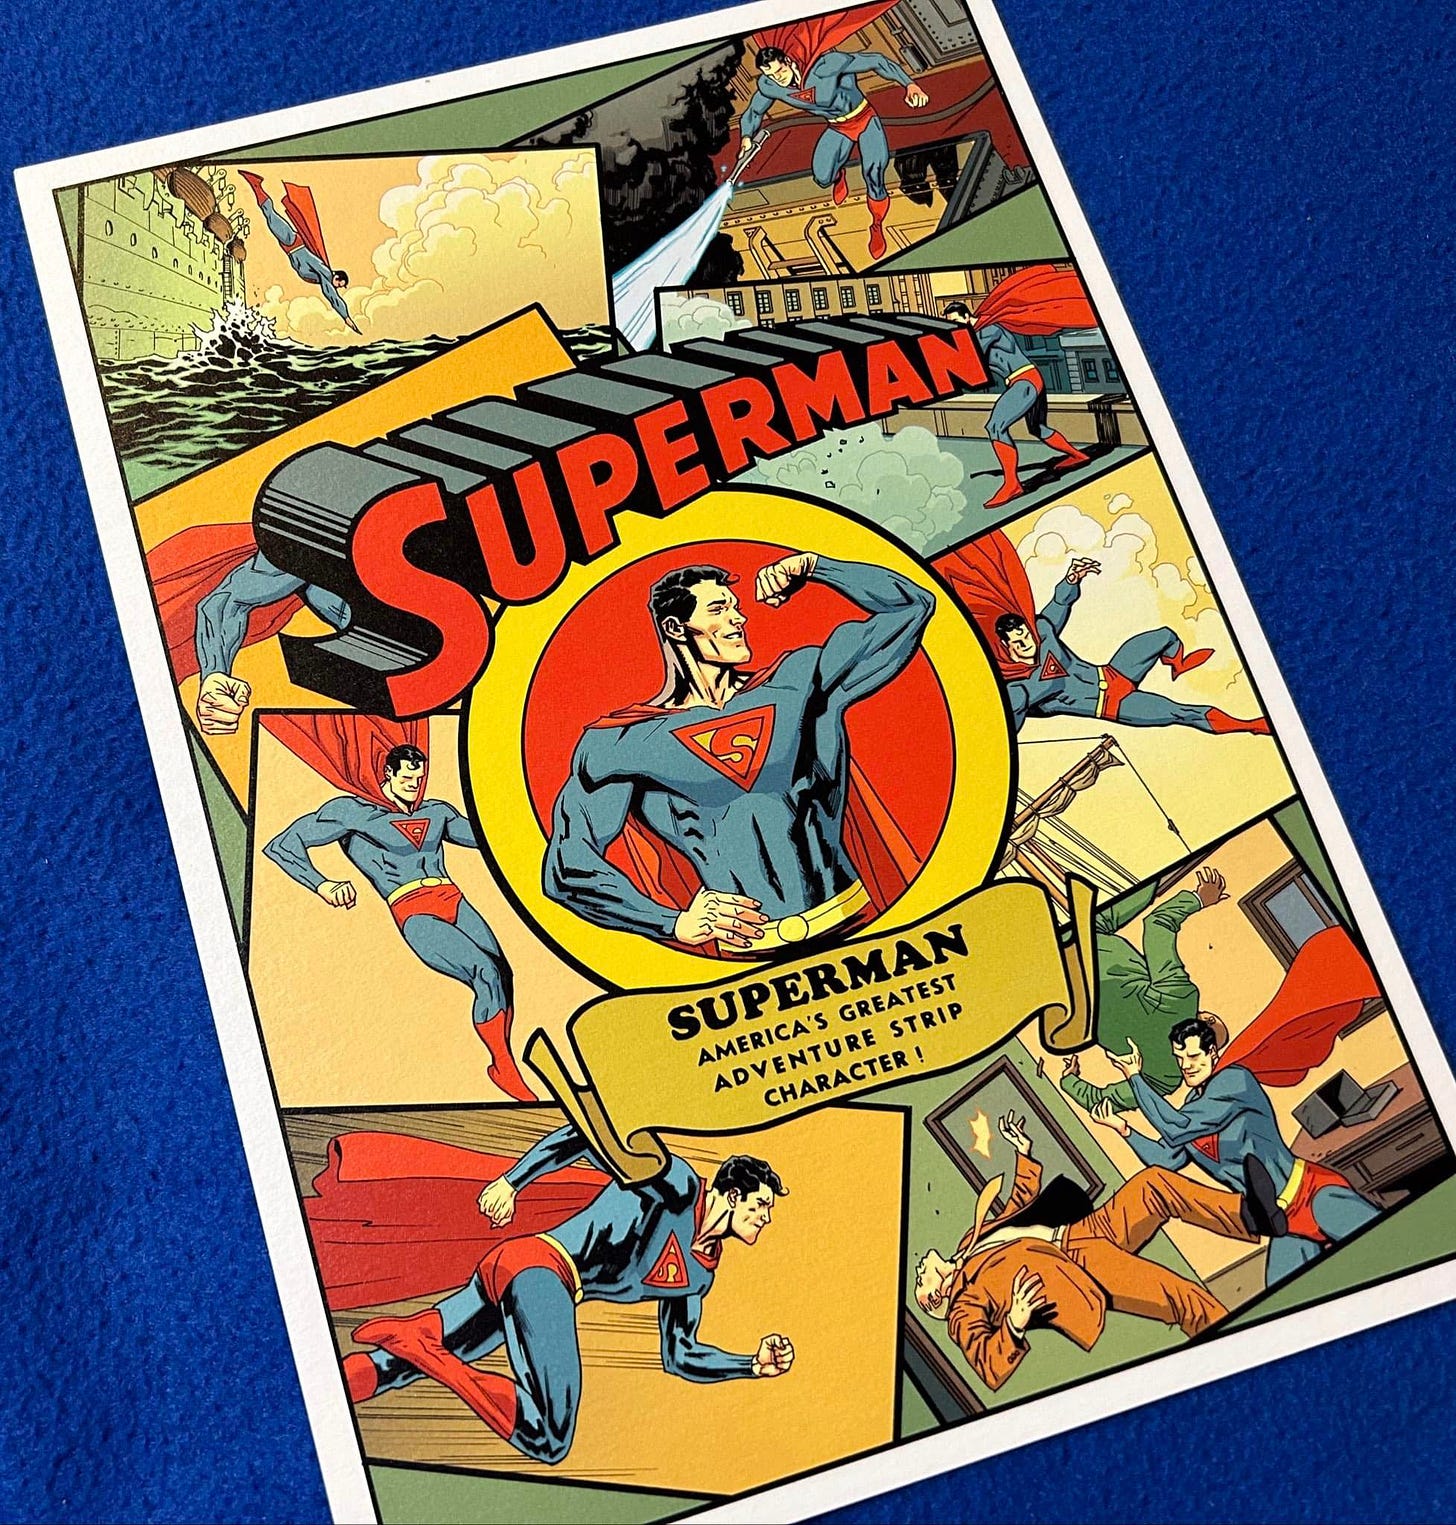 May be an image of Superman and text that says 'SUPERMAN SUPERMAN OD33 SUPERMAN SUP GREATEST STRIP AMERICA'S DVENTURE CHARACTER!'